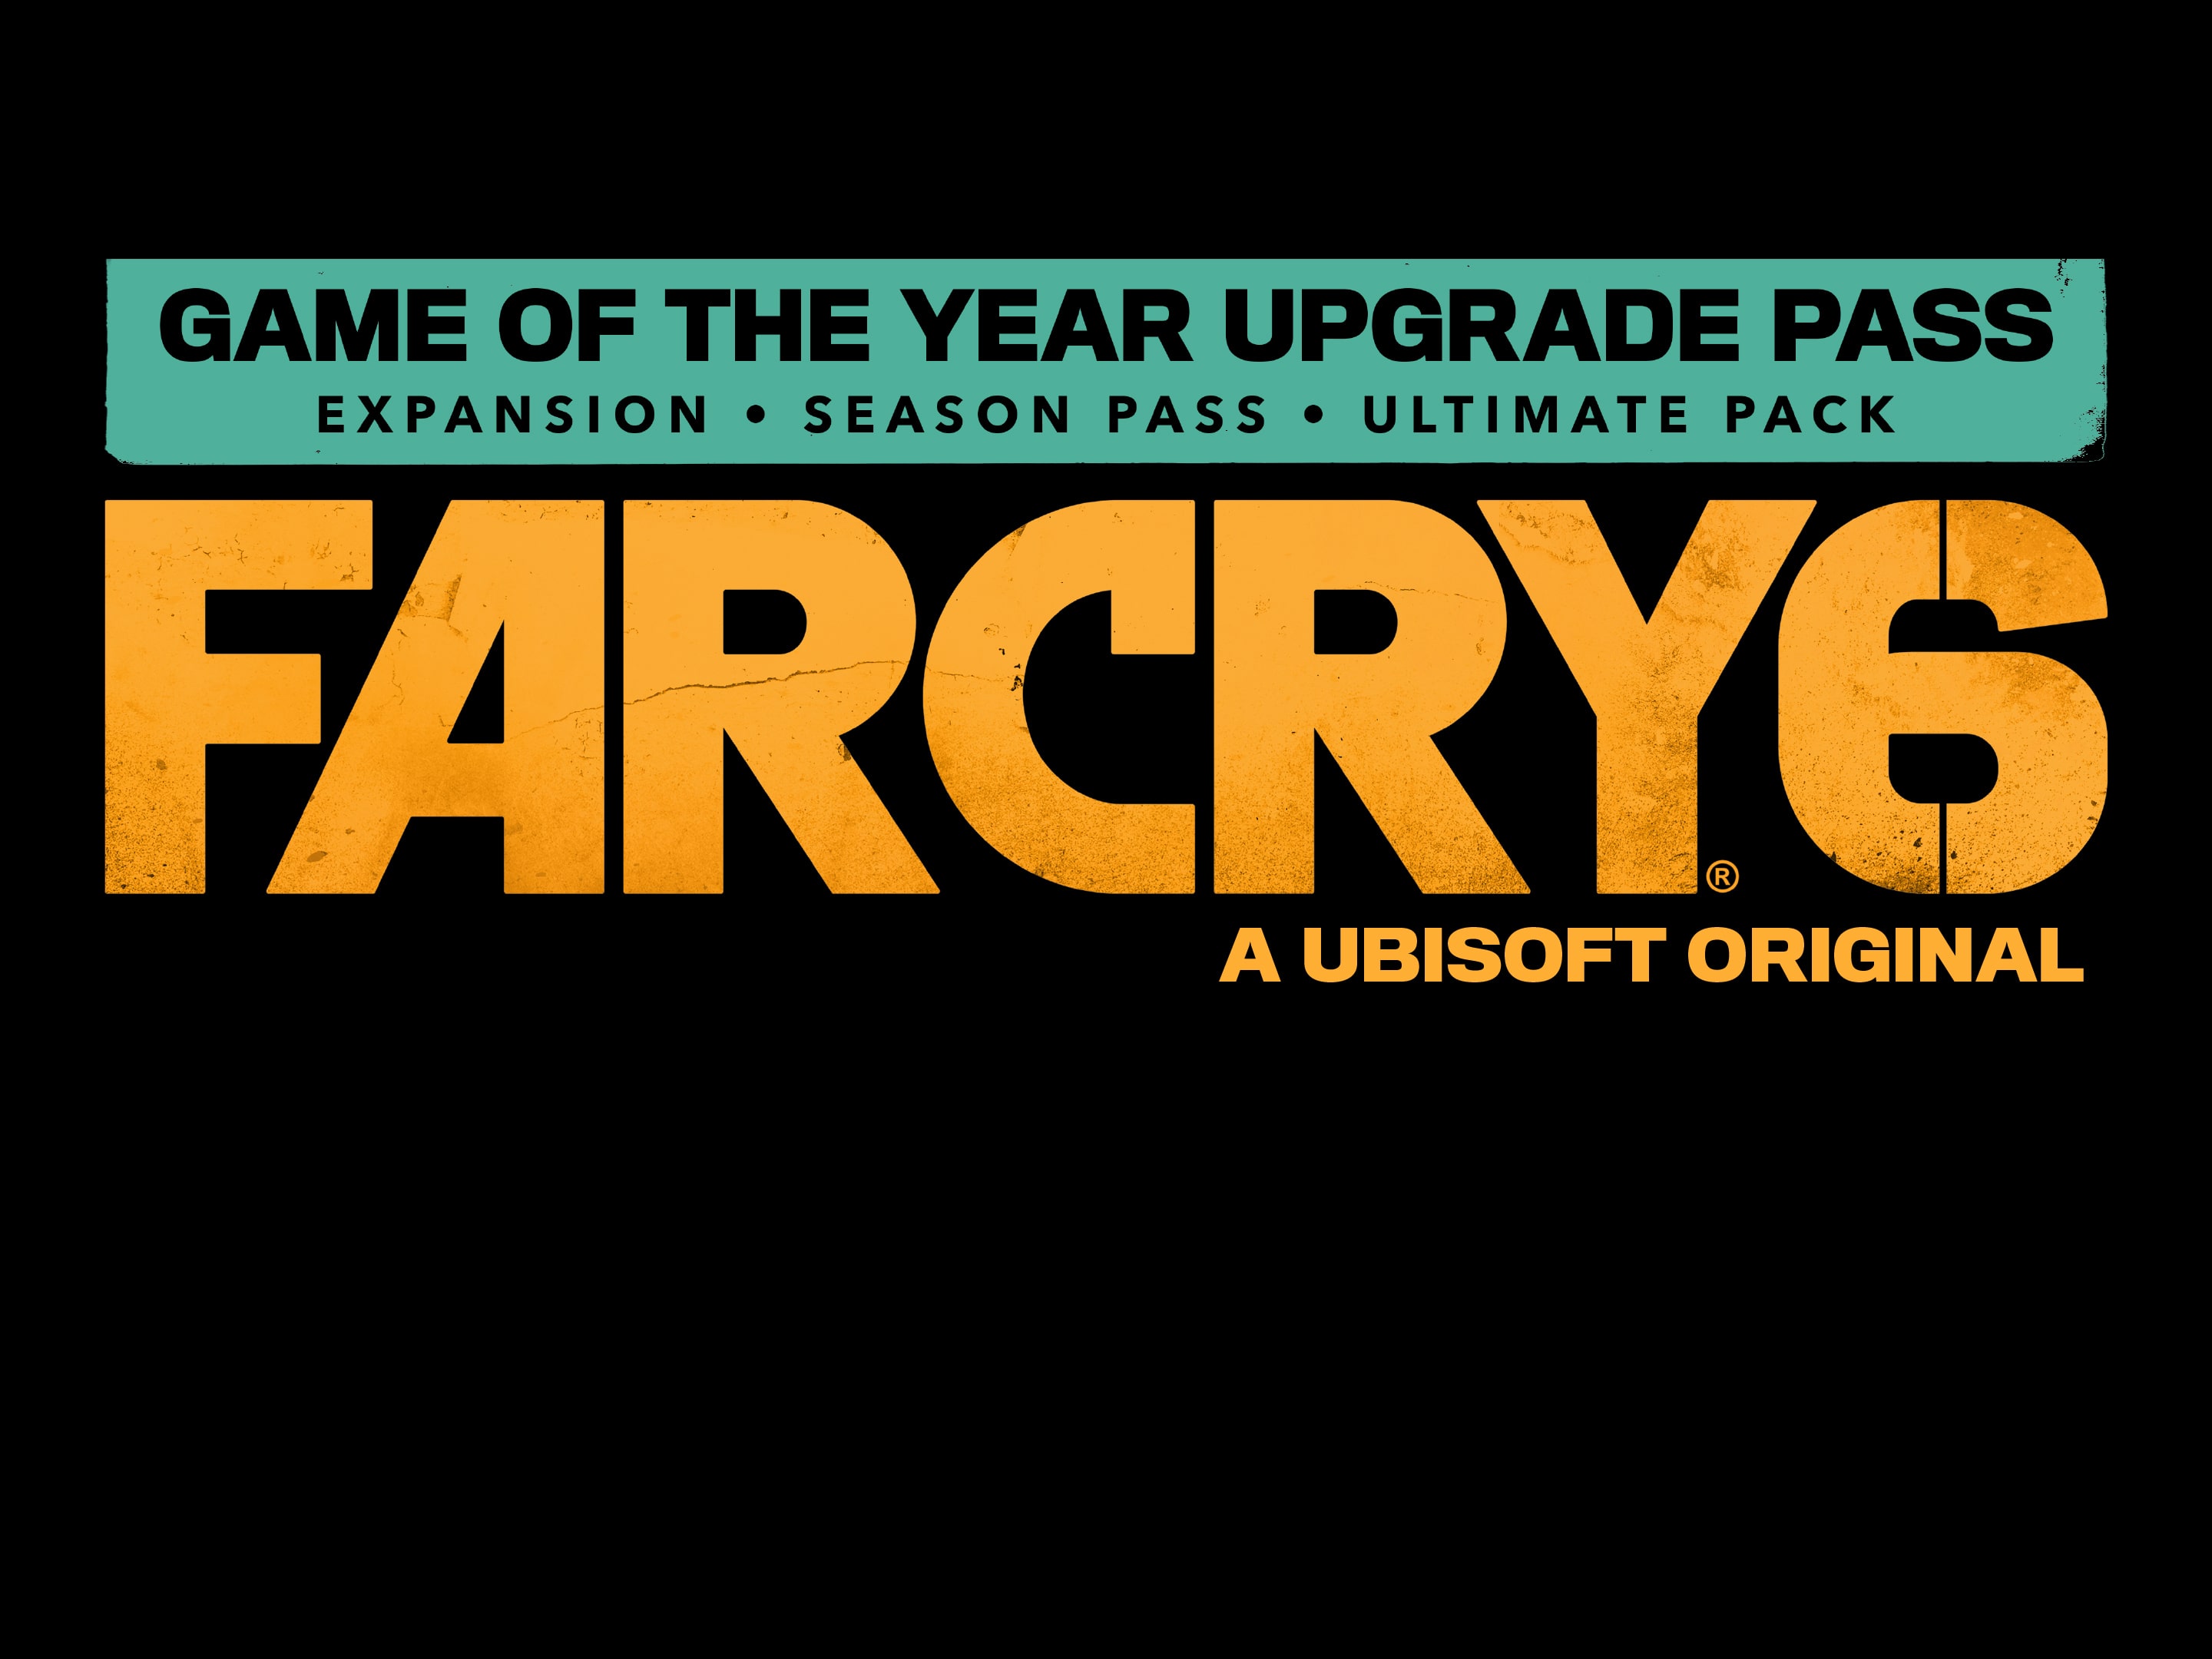 Far Cry 6 Set For Release By April 2021, To Be Set Outside The US - Report  - PlayStation Universe